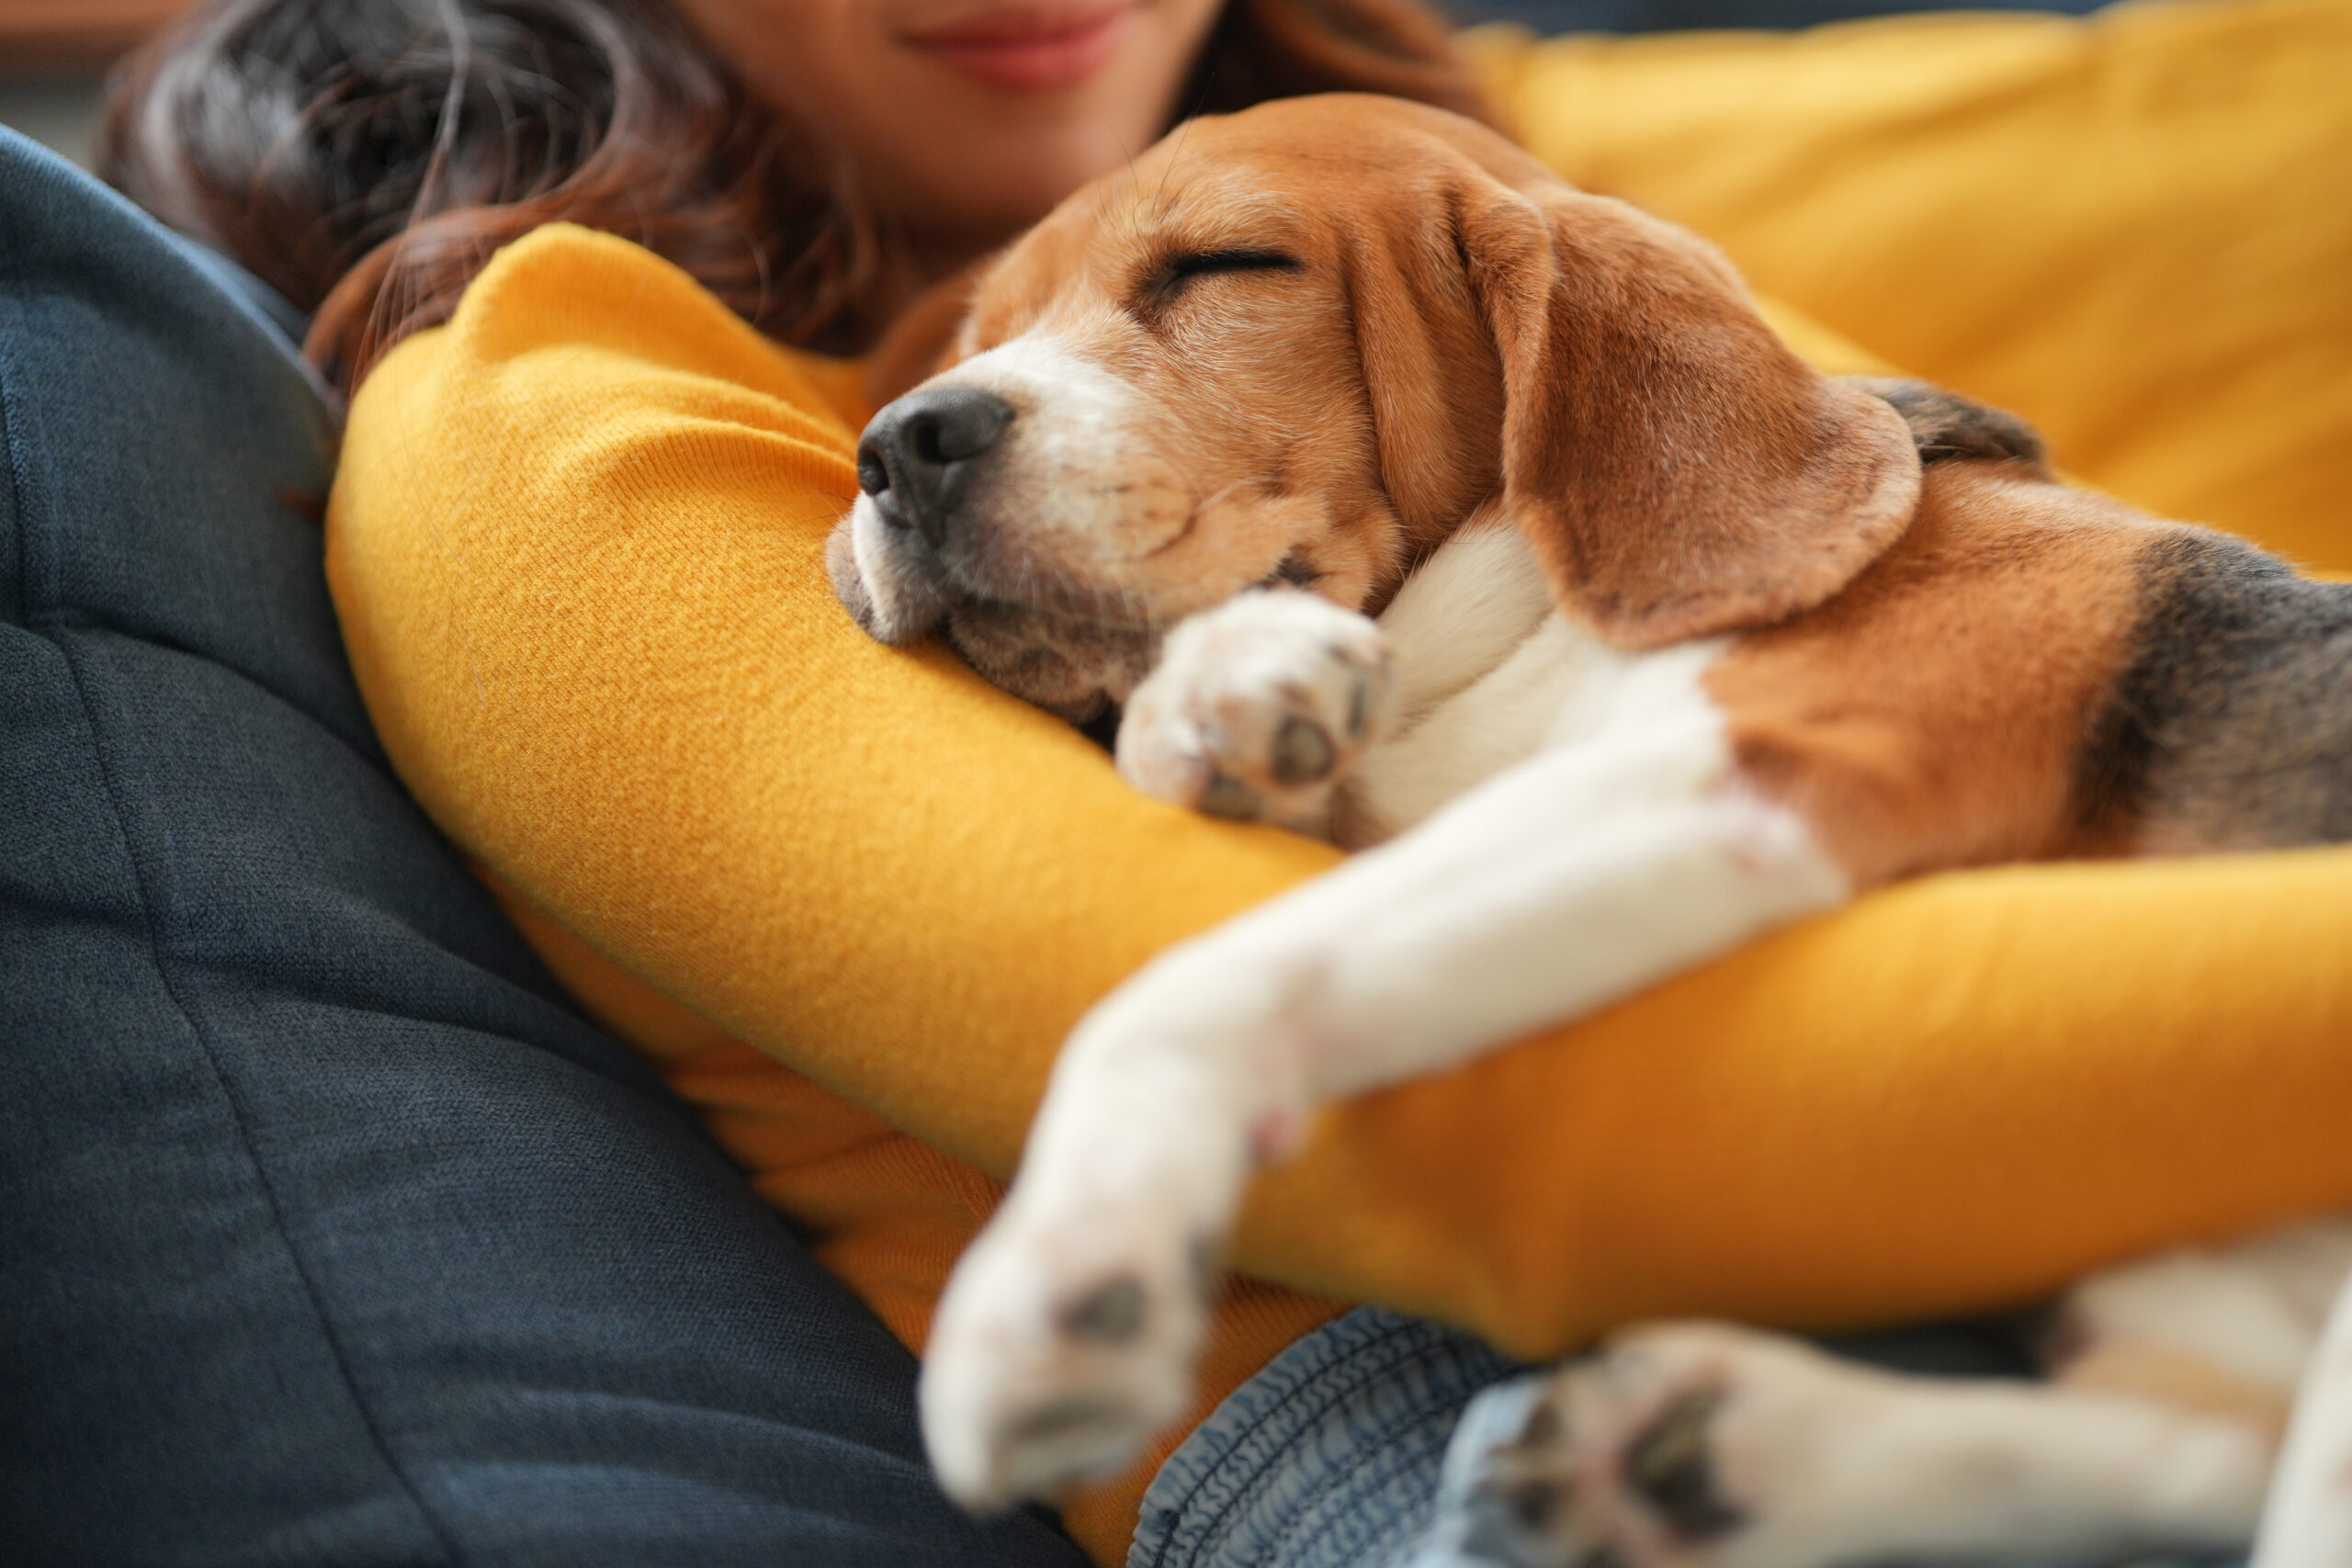 Photo of a beagle cuddled up in the arms of a woman in a yellow shirt.